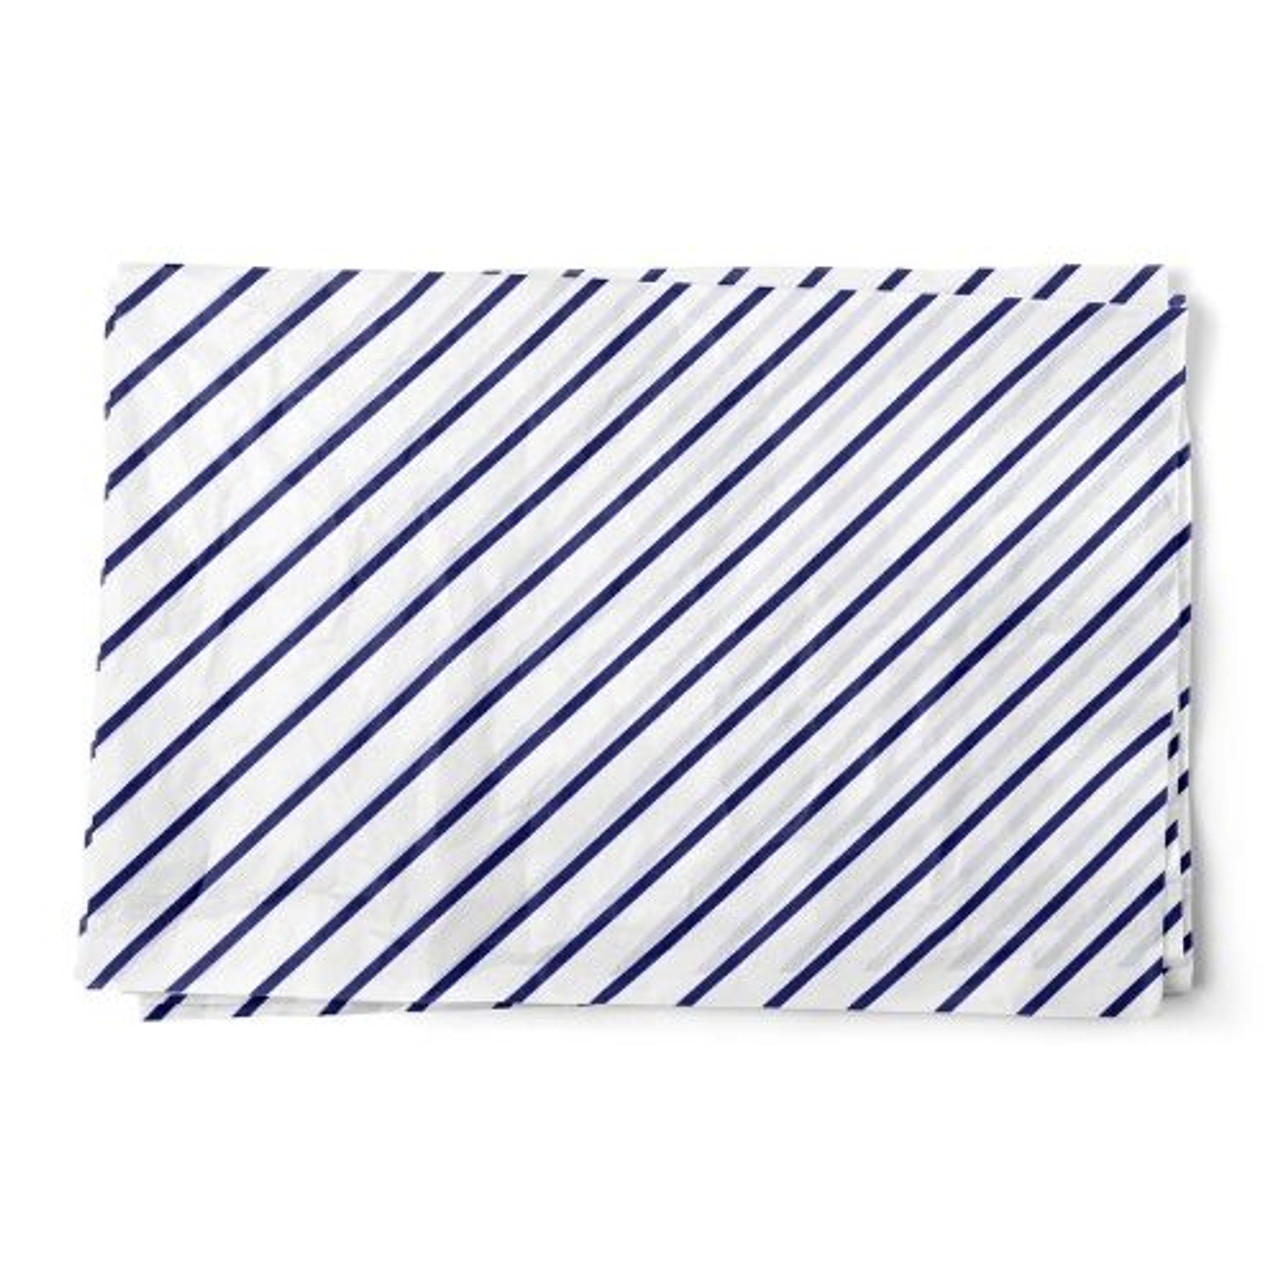 Decorative 100% Recycled Tissue Paper, Blue Stripes Print